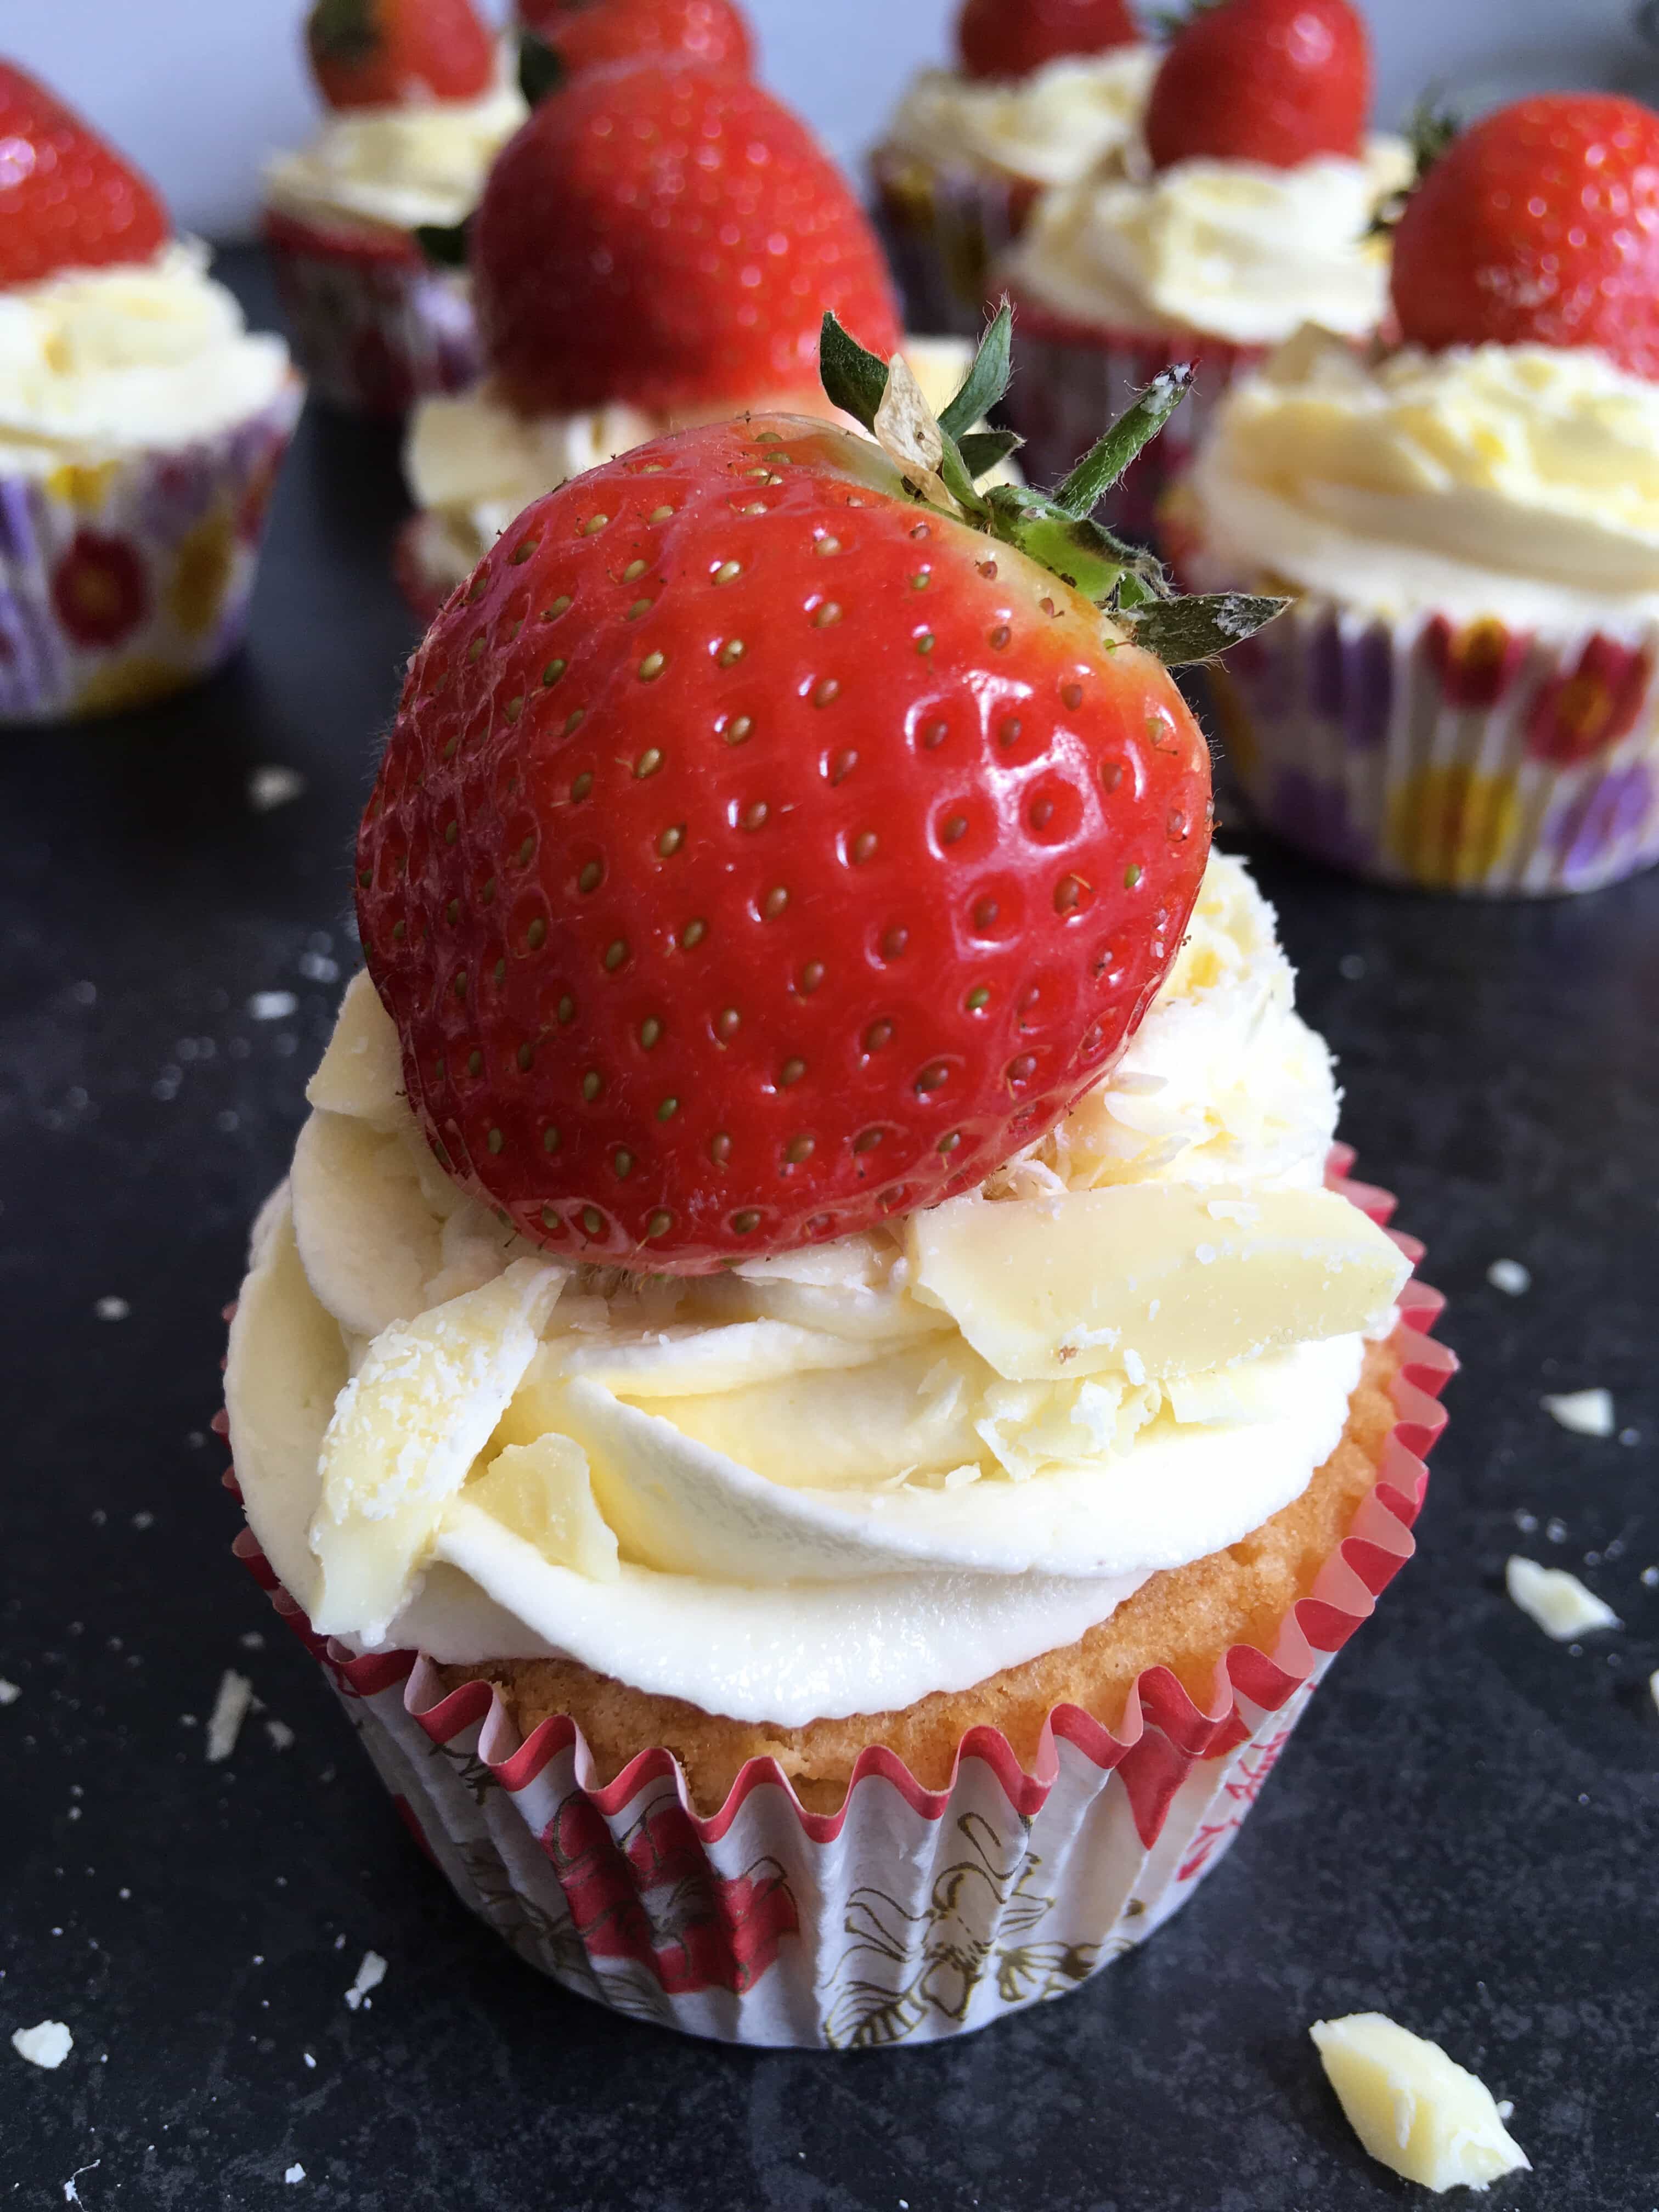 a close up picture of a vanilla cupcake topped with white chocolate frosting, a fresh strawberry and grated white chocolate